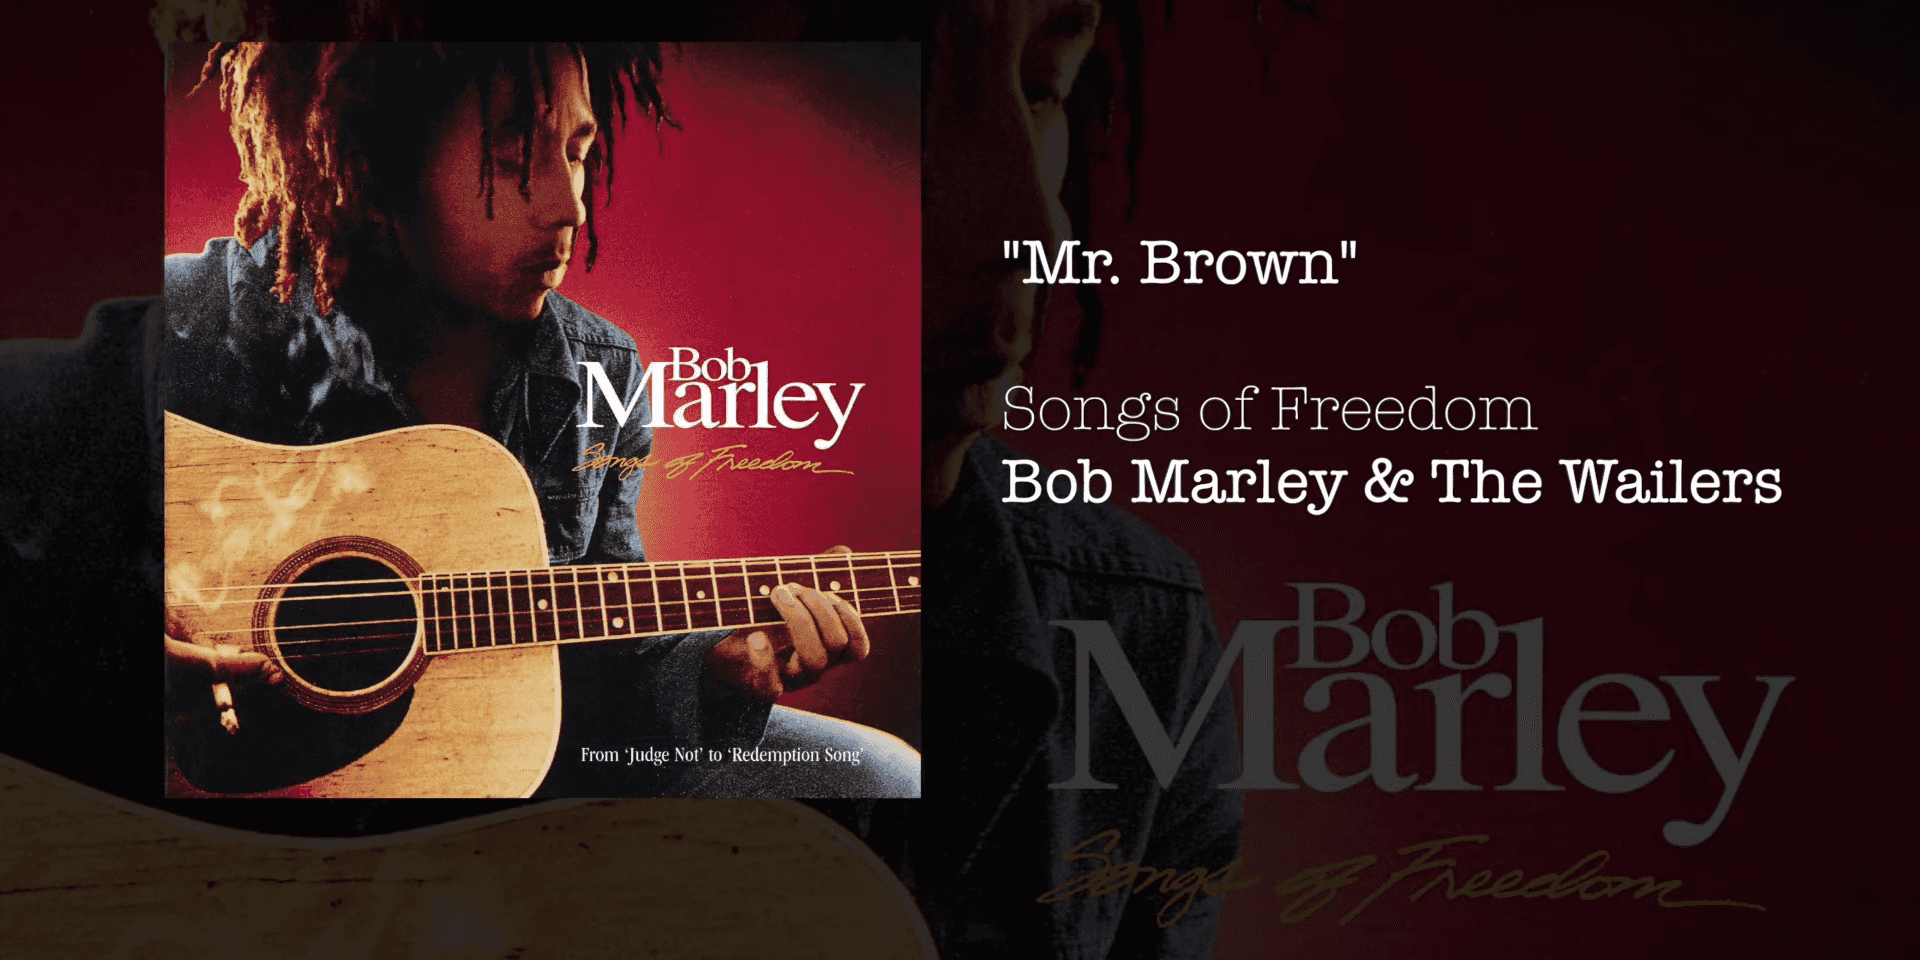 The album photo of Bob Marley is on the left and the song title "Mr. Brown" is on the right side.